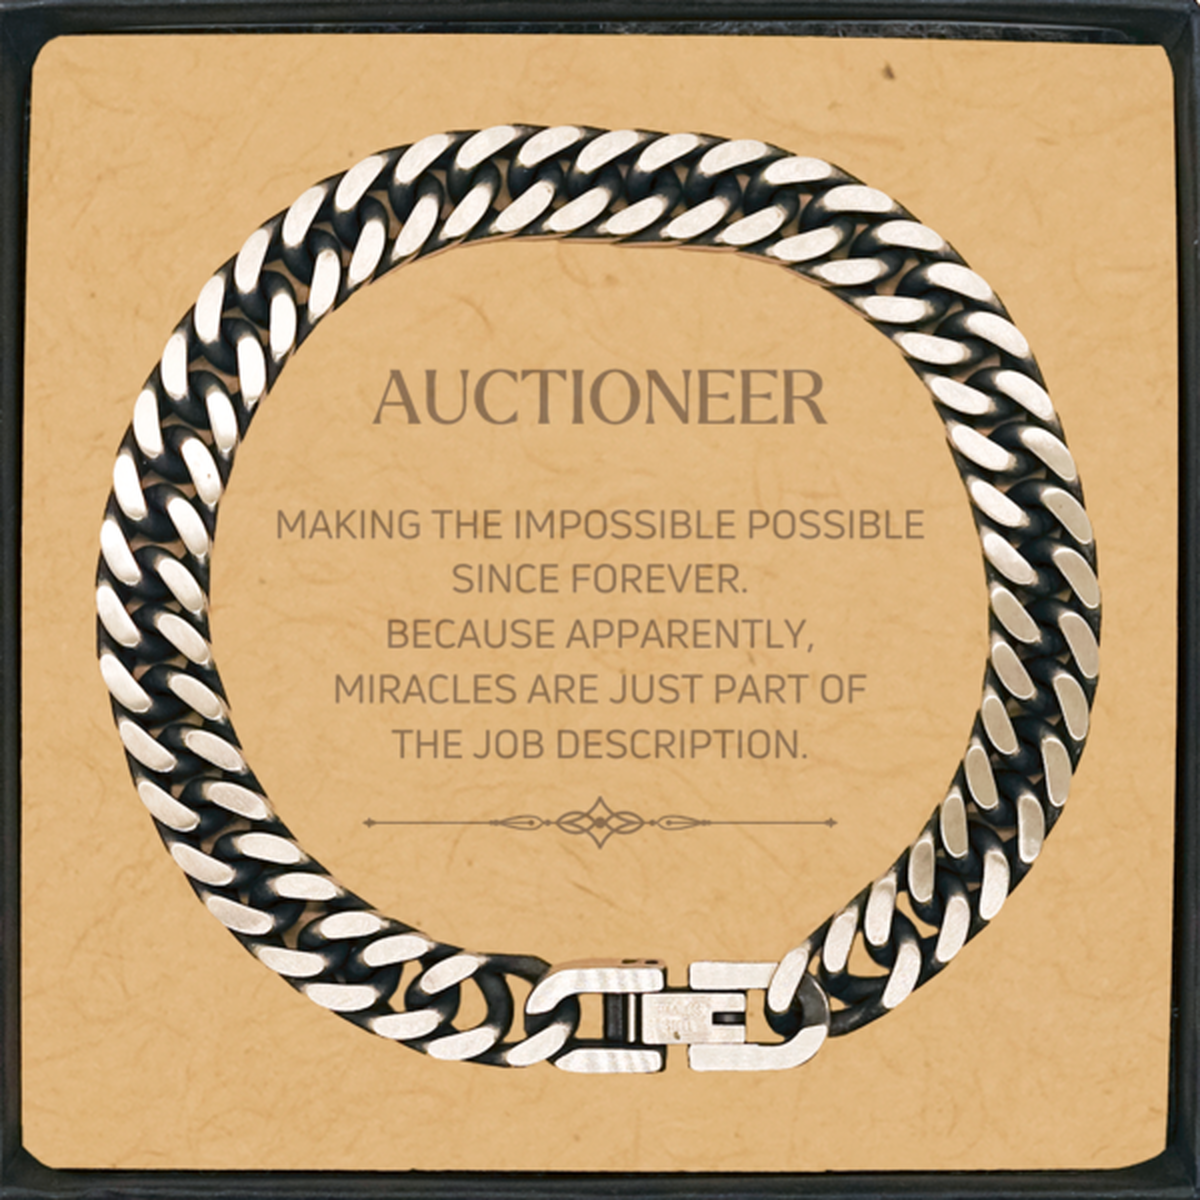 Funny Auctioneer Gifts, Miracles are just part of the job description, Inspirational Birthday Cuban Link Chain Bracelet For Auctioneer, Men, Women, Coworkers, Friends, Boss